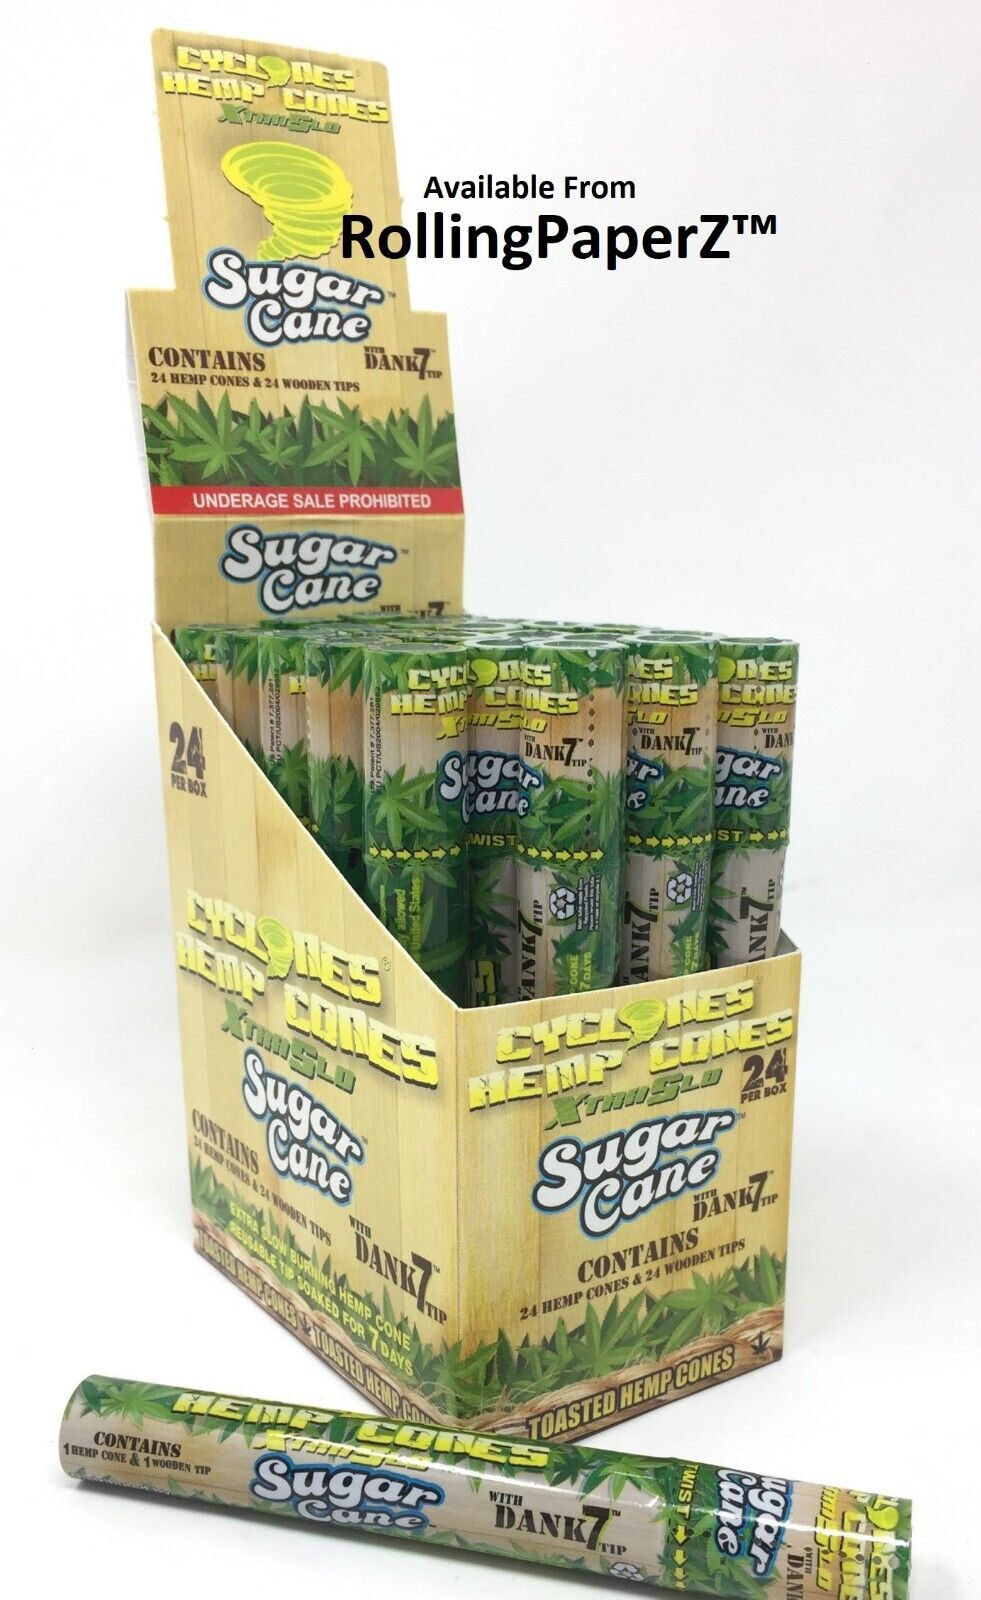 Cyclones SUGAR CANE Flavored XTRASLOW Cones - 24 Packs - FULL SEALED BOX